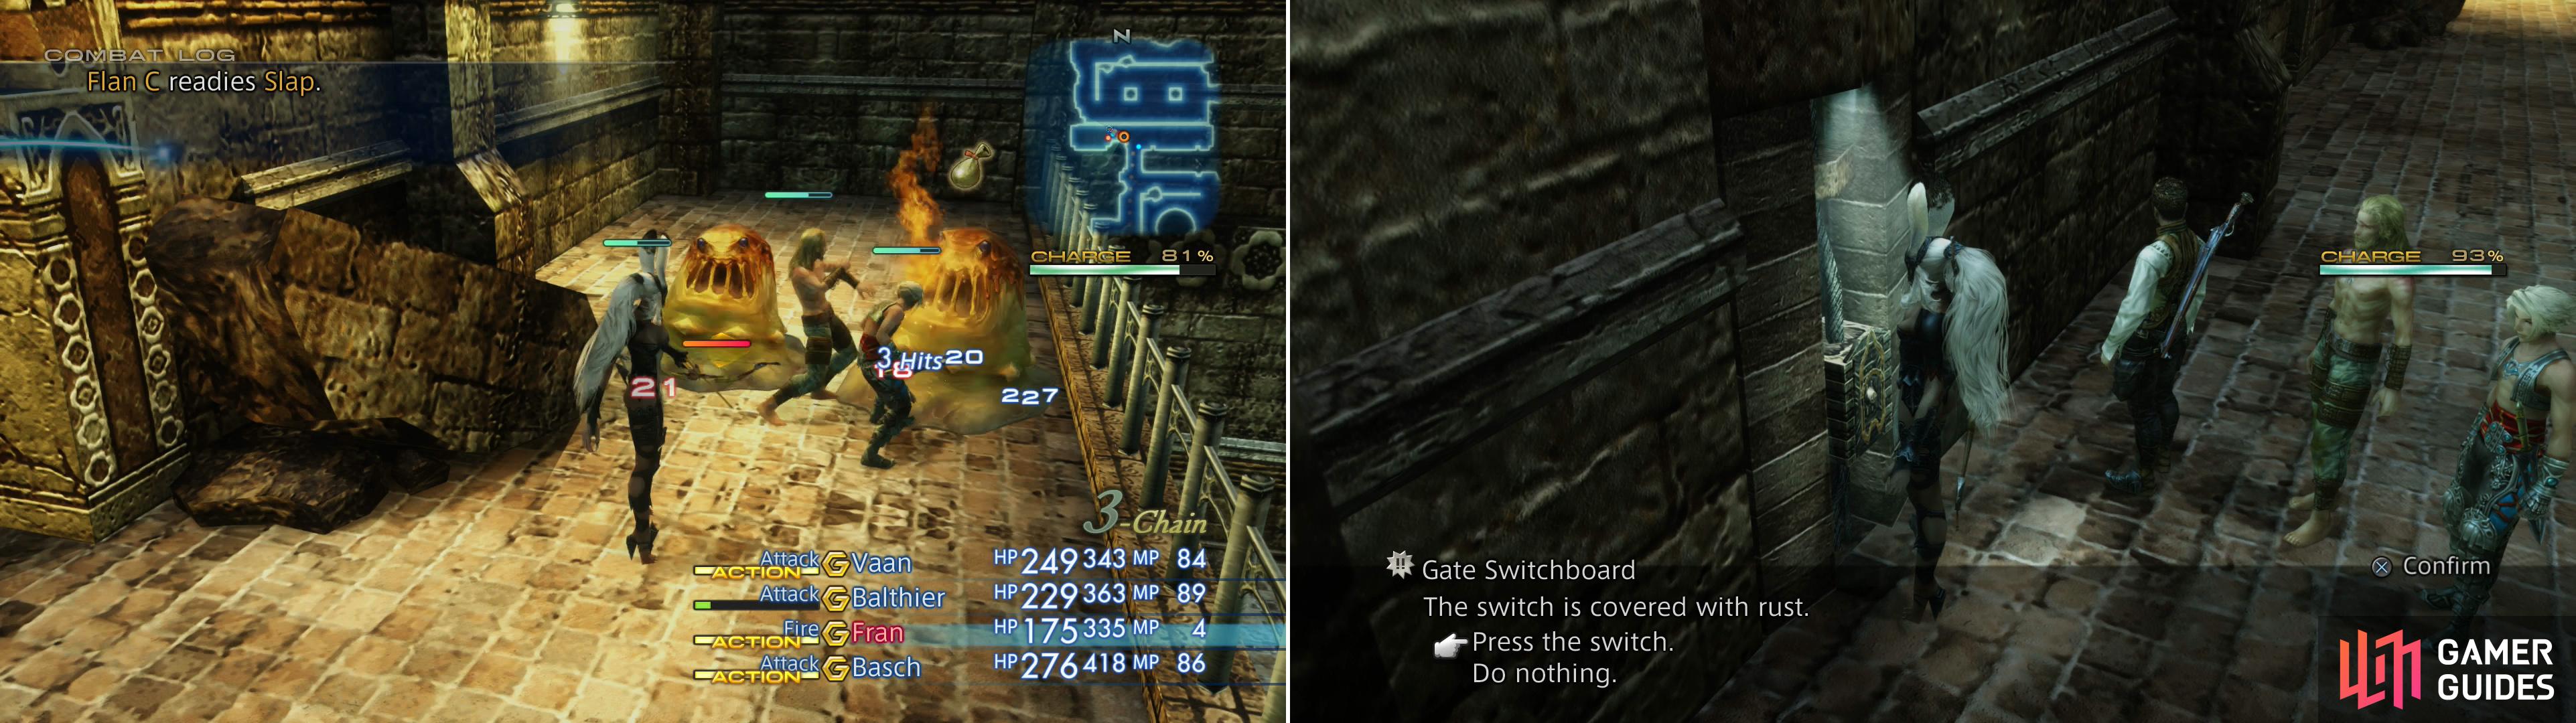 More Flans - now normal enemies - lurk in Barheim Passage, but Fran’s Fire magick works just as well here as in Garamsythe (left). Flip a switch to open another gate (right).